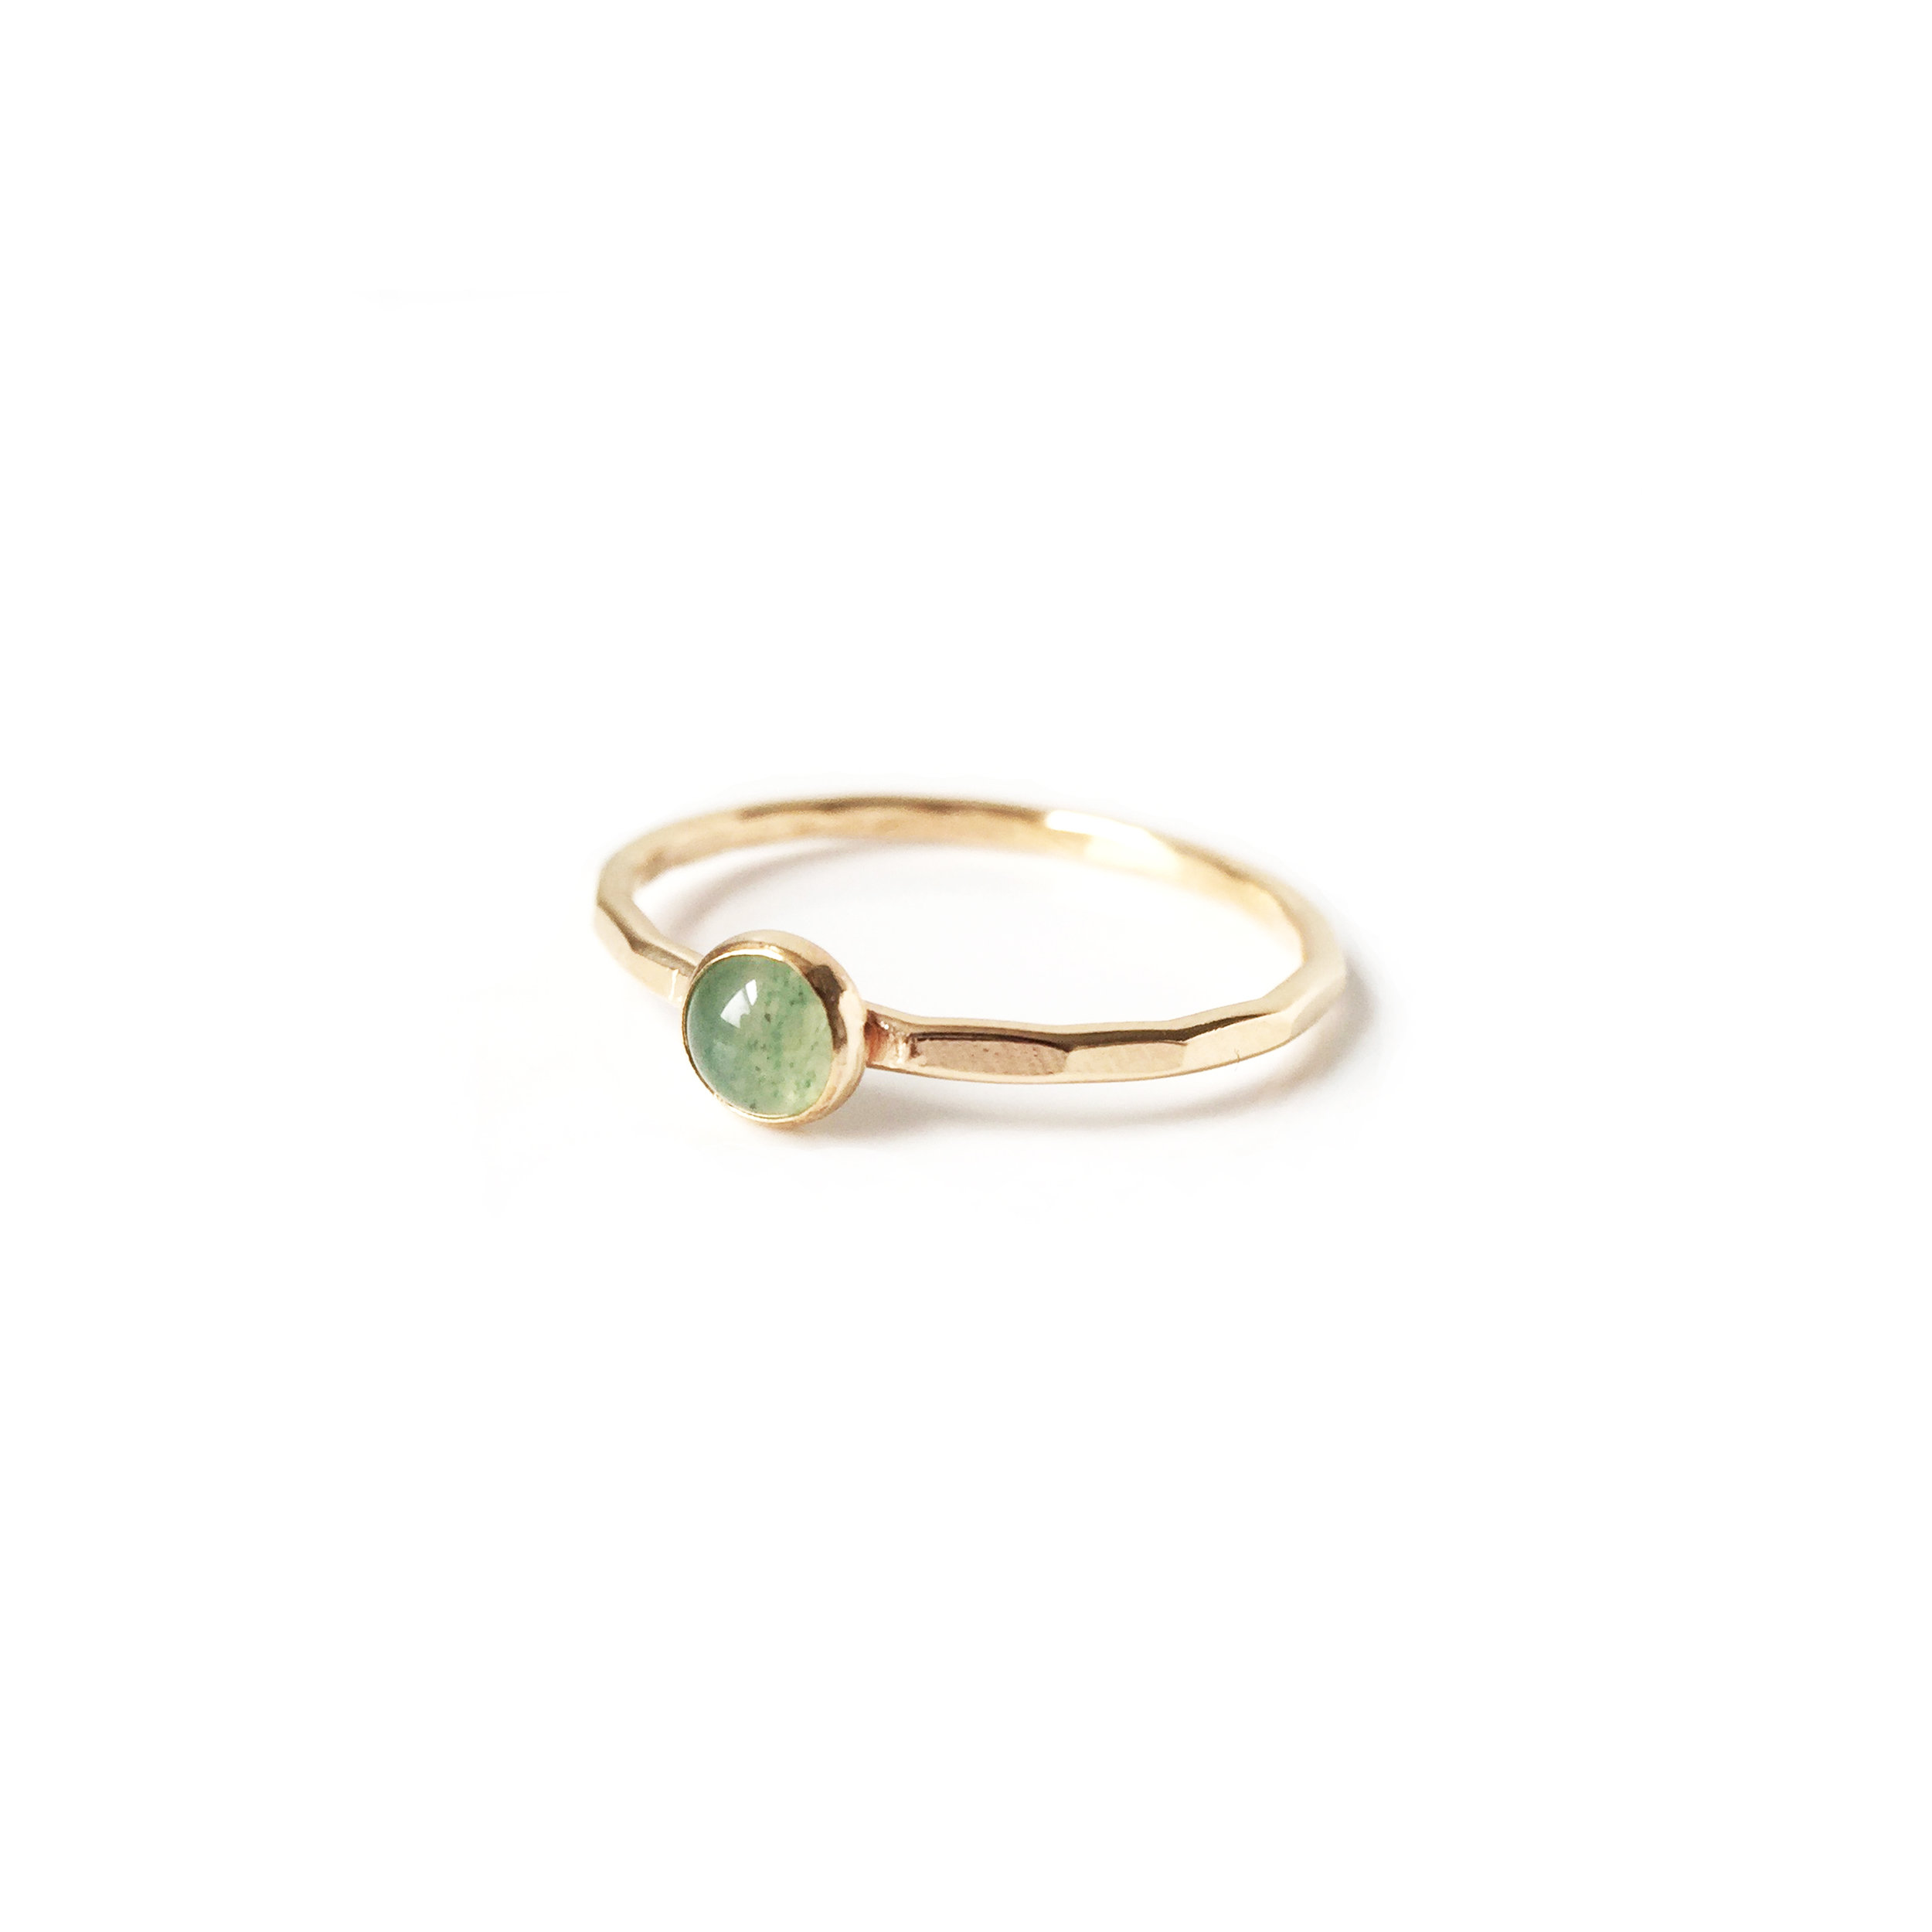 Handmade Hammered Gold Filled and Aventurine Ring 